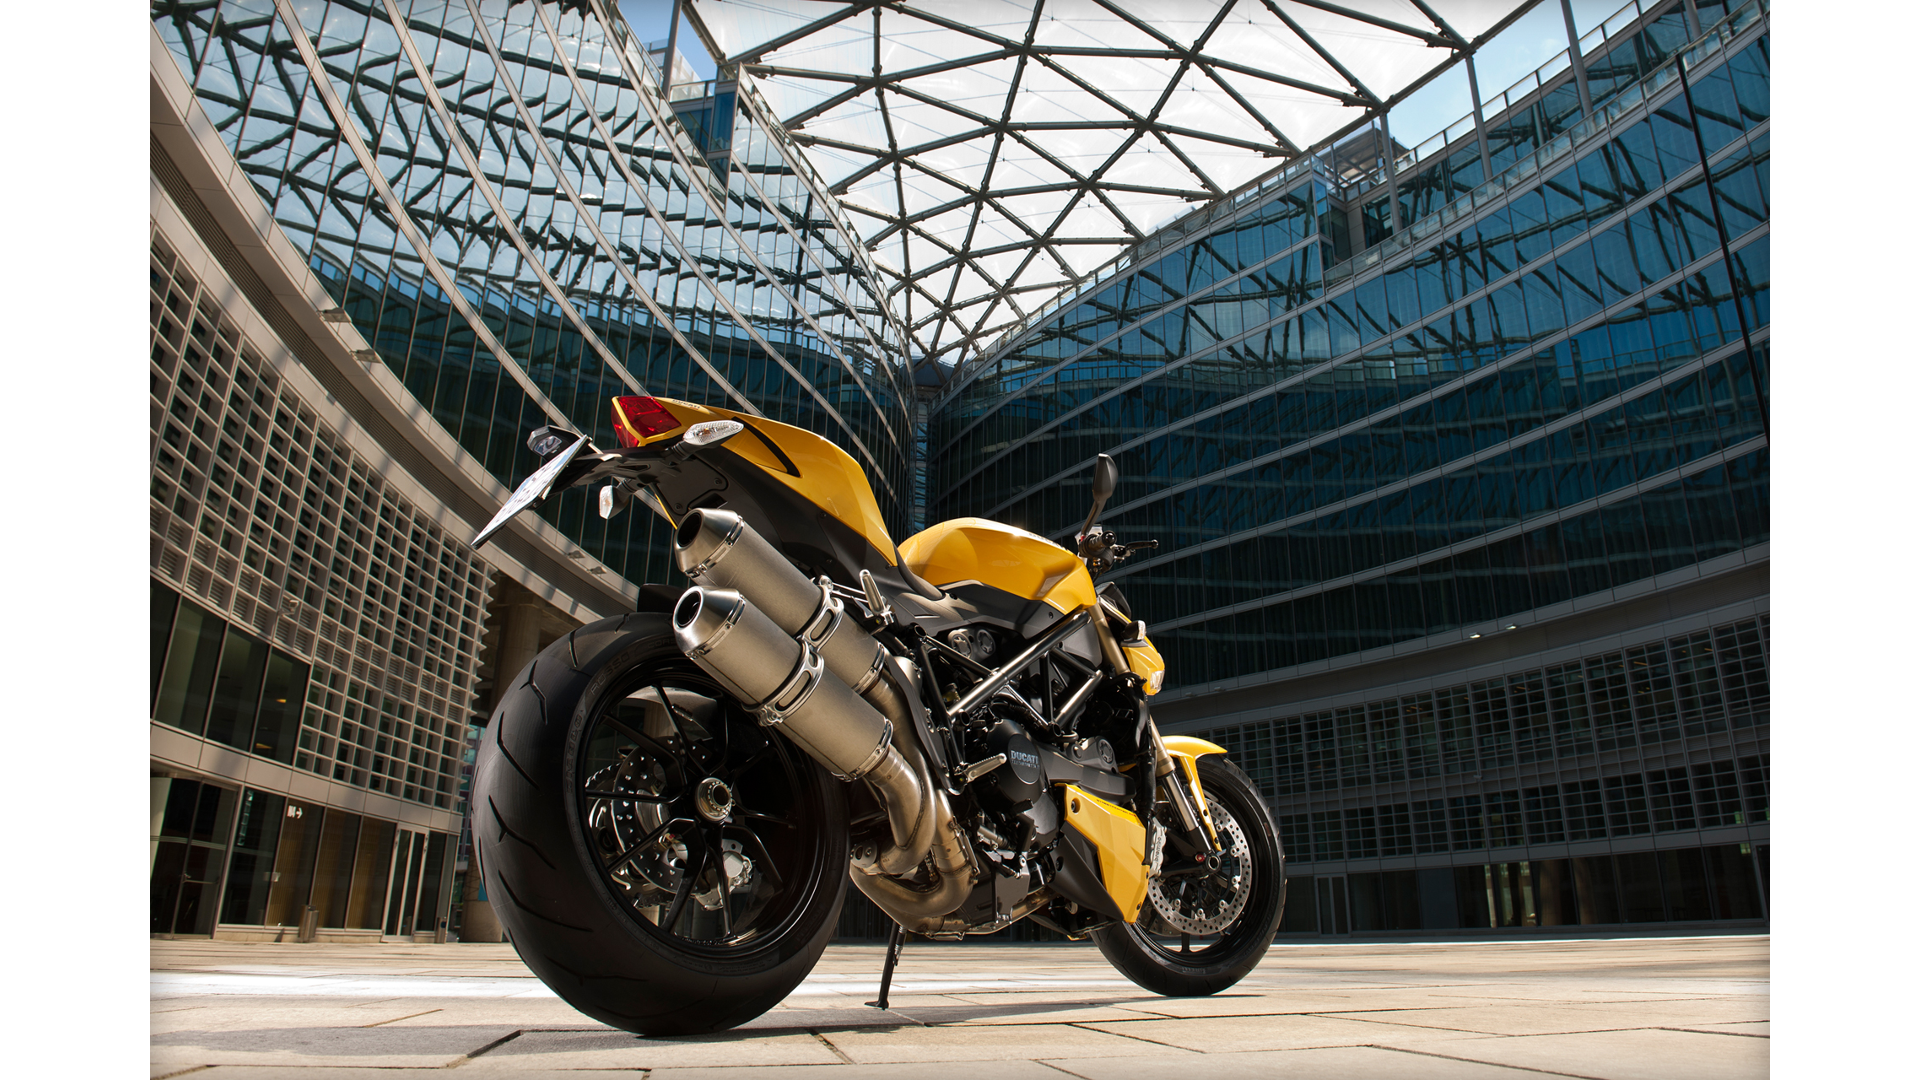 Ducati Streetfighter 848 Wallpapers